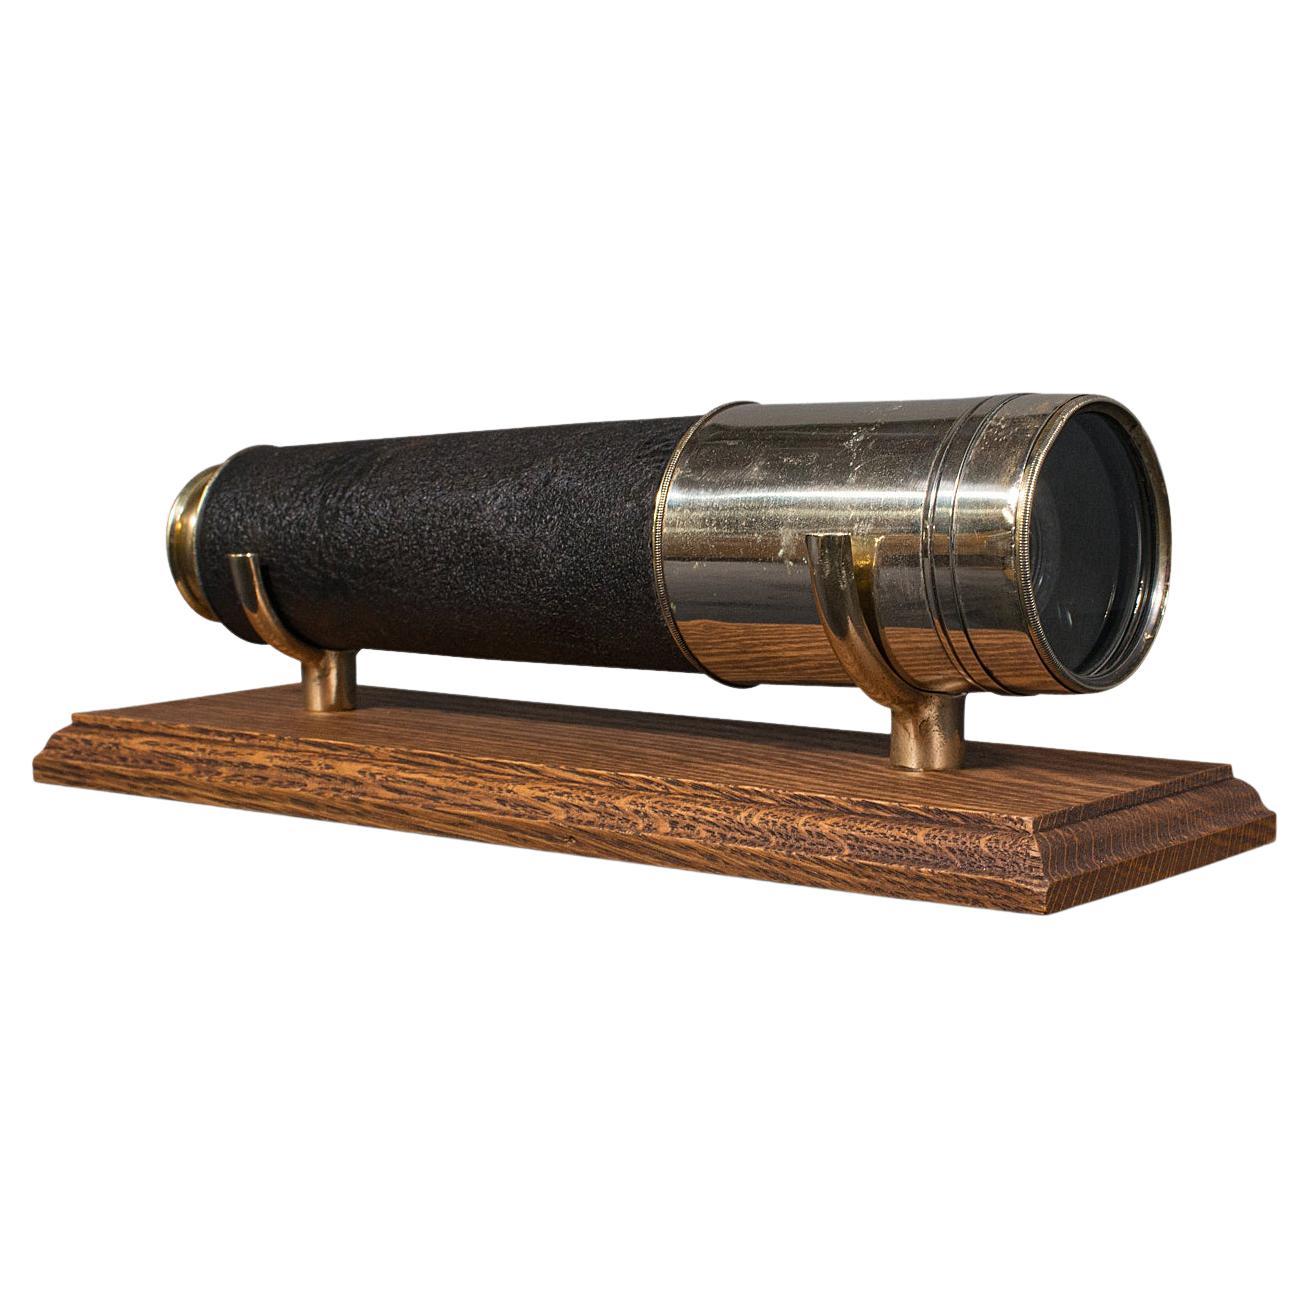 Antique Ross Telescope, English, 3 Draw, Terrestrial Refractor, Early 20th, 1920 For Sale